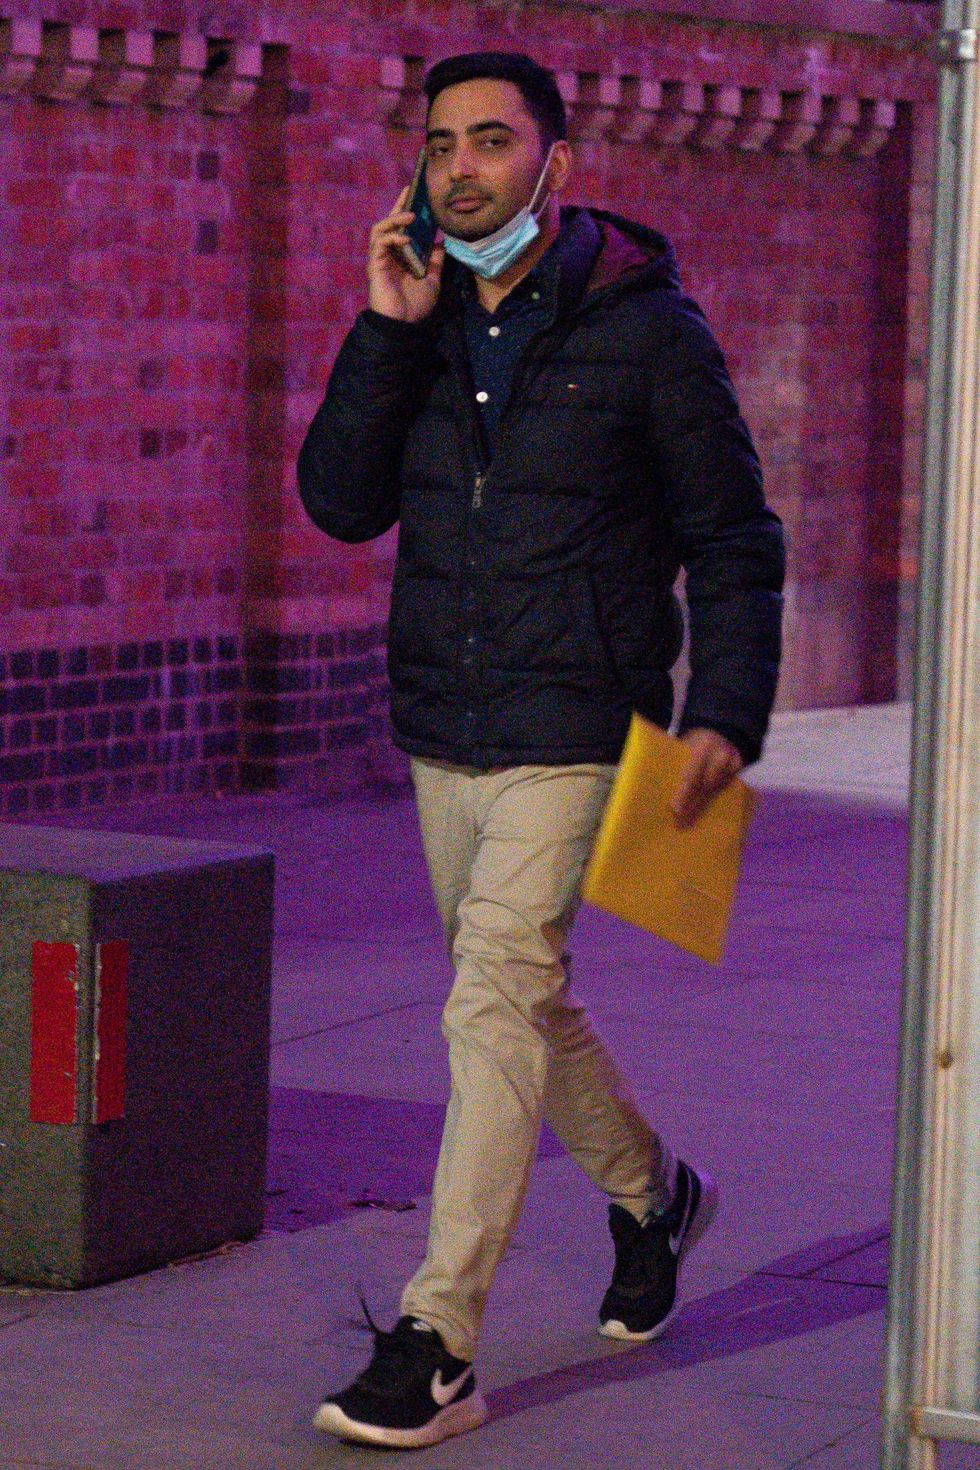 Tayabb Shah after leaving Nottingham Crown Court where he is accused of five sex assaults at Nottingham's Queen's Medical Centre between September 11 and September 25 2020.